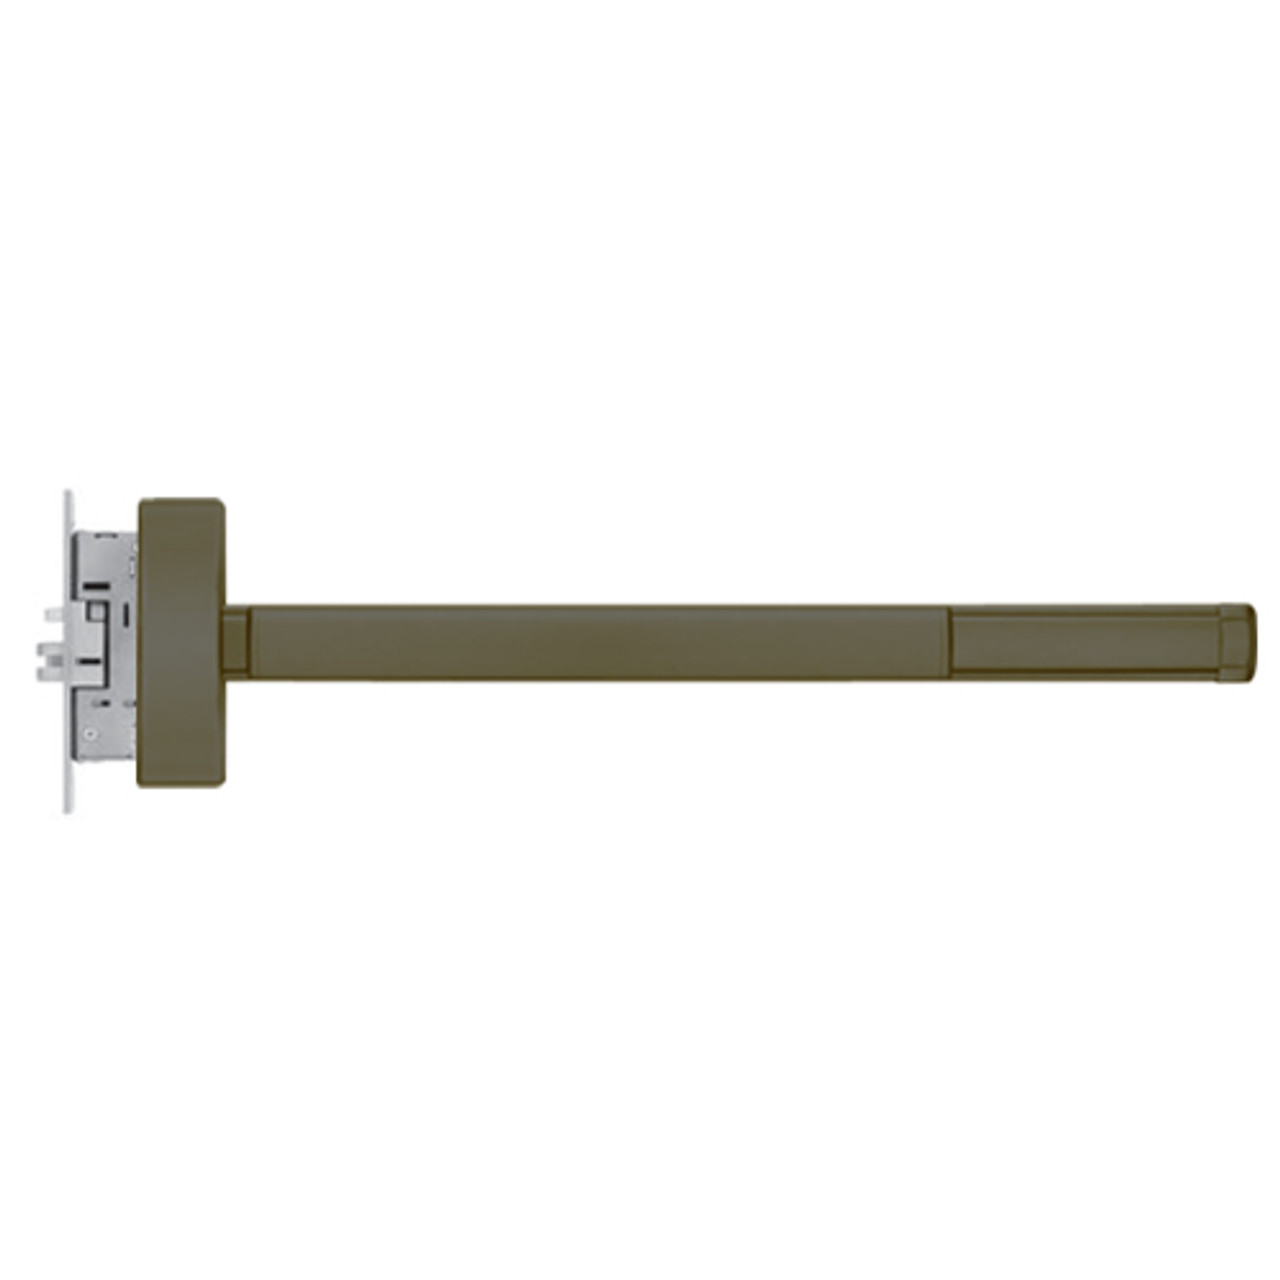 TSFL2303-RHR-613-36 PHI 2300 Series Fire Rated Apex Mortise Exit Device with Touchbar Monitoring Switch Prepped for Key Retracts Latchbolt in Oil Rubbed Bronze Finish